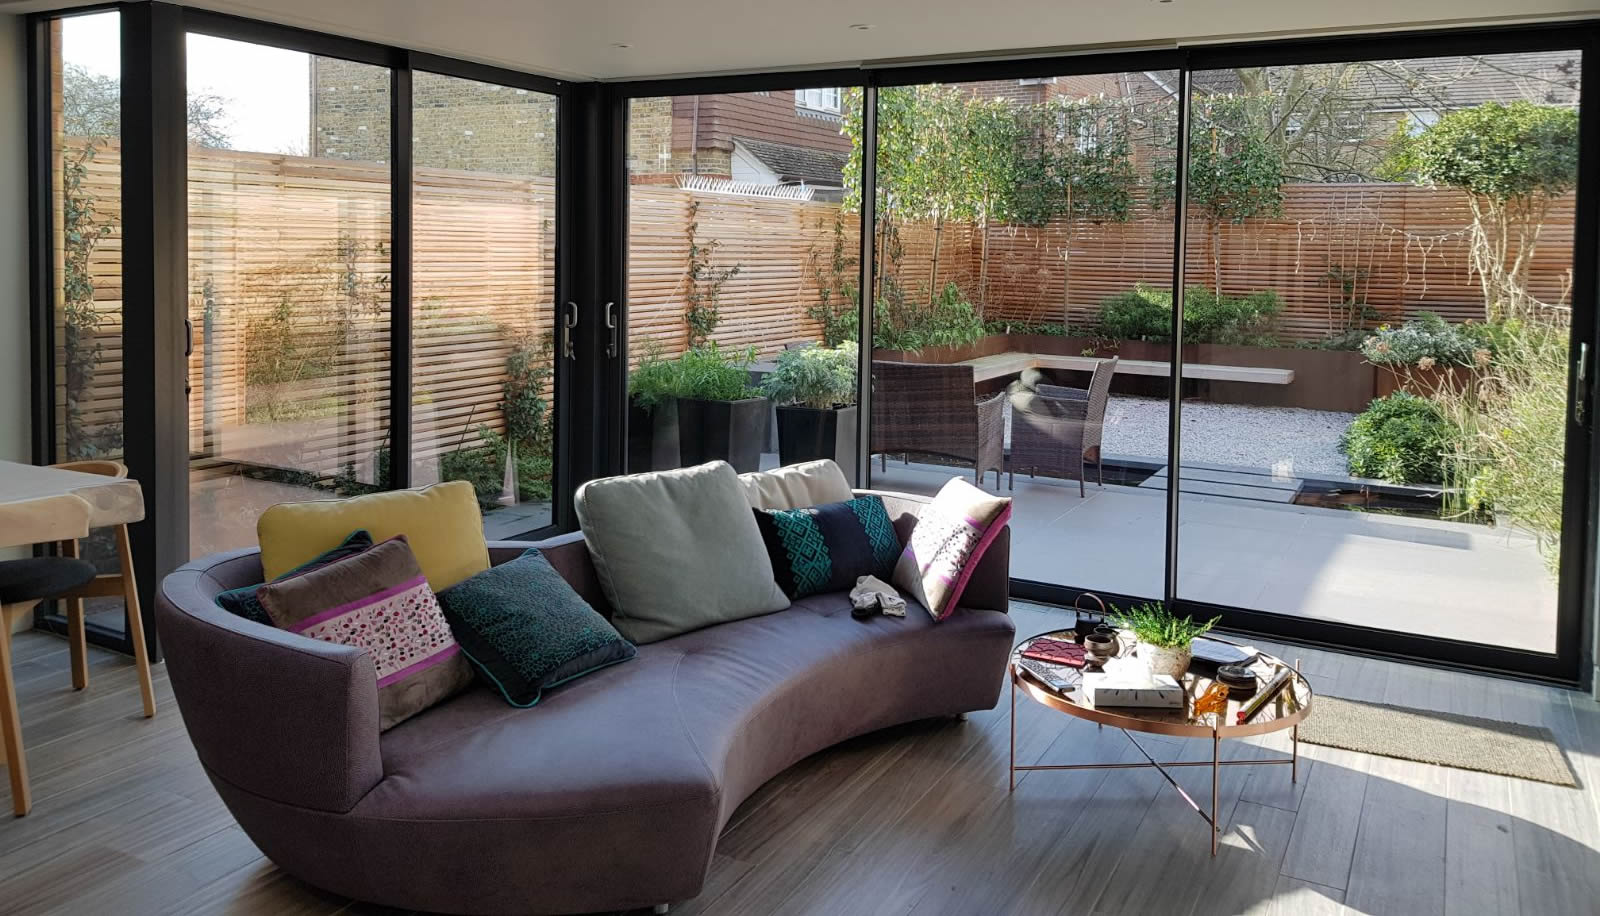 Bring The Outside in With Our Beautiful High-End, Sliding Doors.